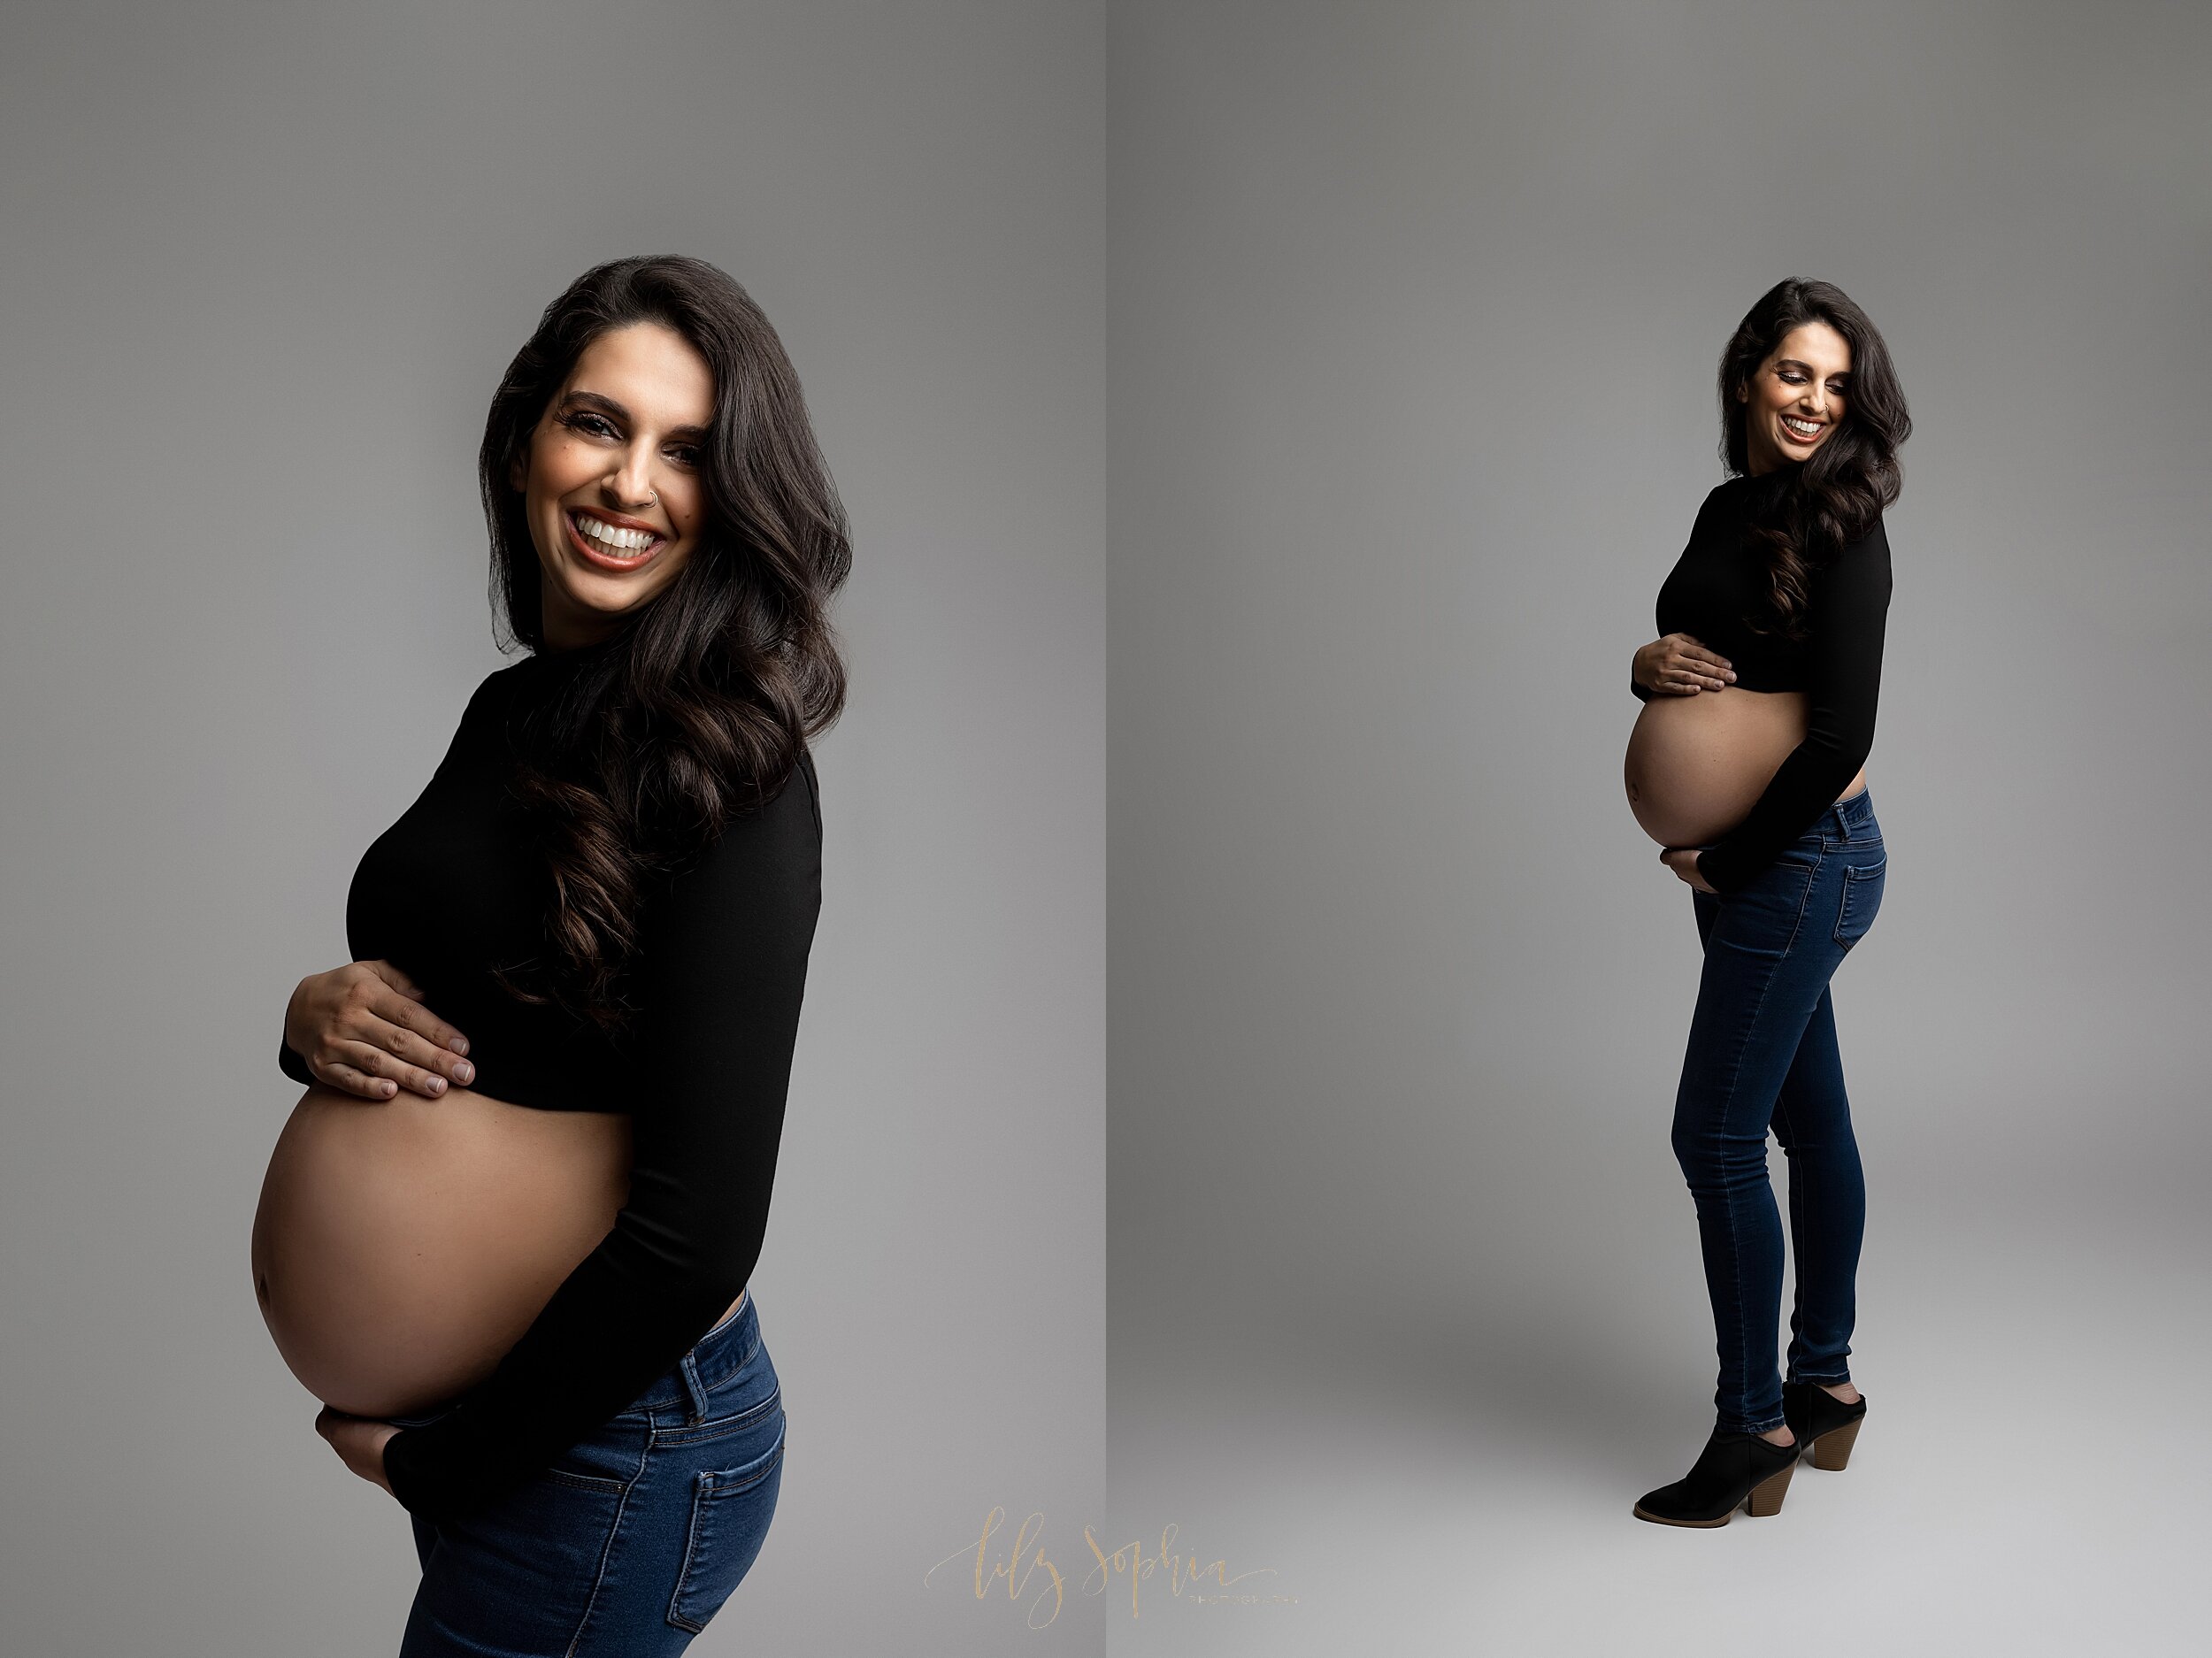  Fine art maternity Atlanta studio portrait of smiling pregnant woman with long brown hair wearing skinny jeans and black turtleneck crop top while cradling her baby bump. 